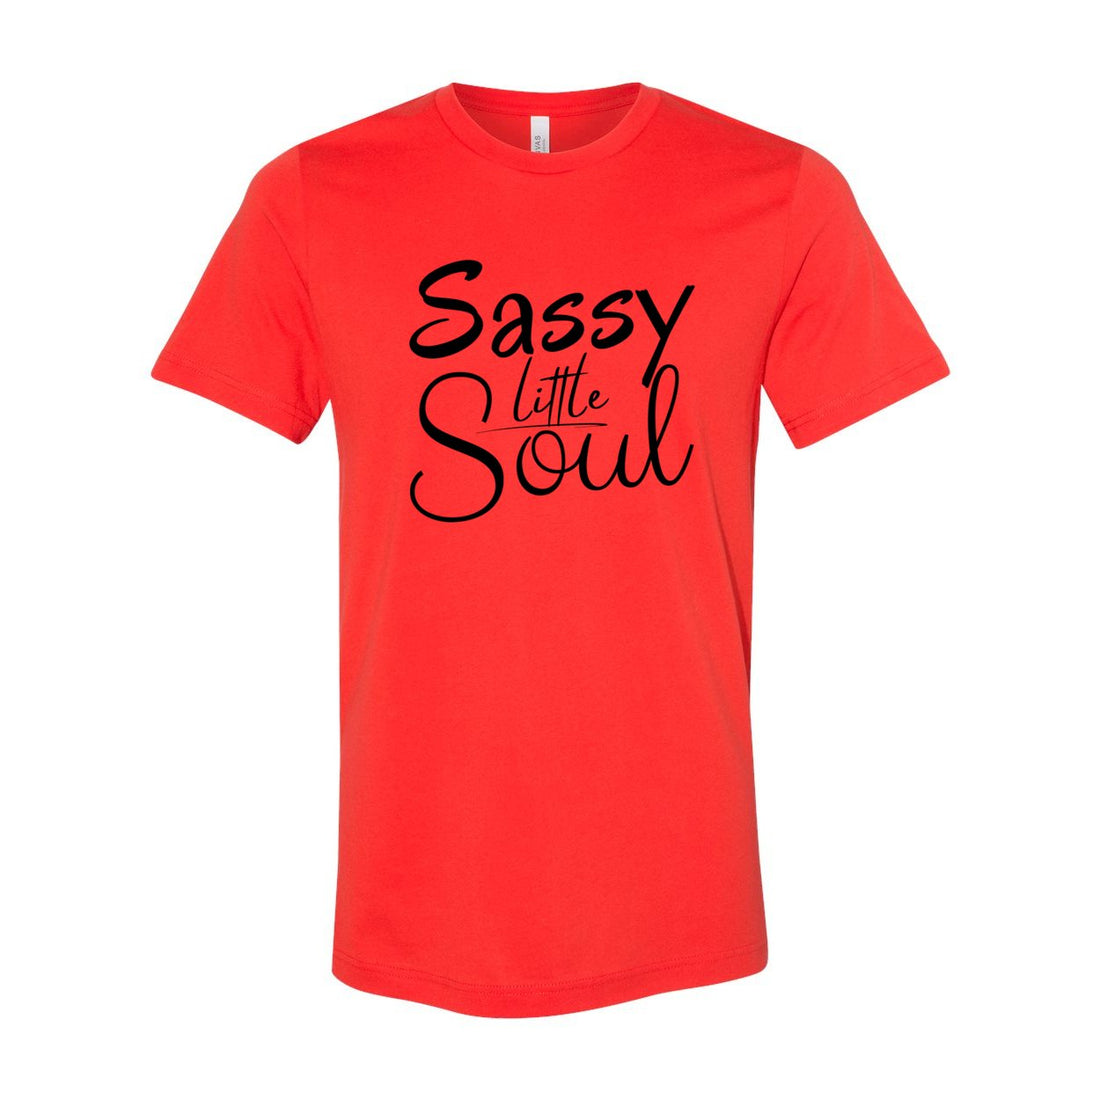 Sassy Soul Jersey Tee - T-Shirts - Positively Sassy - Sassy Soul Jersey Tee